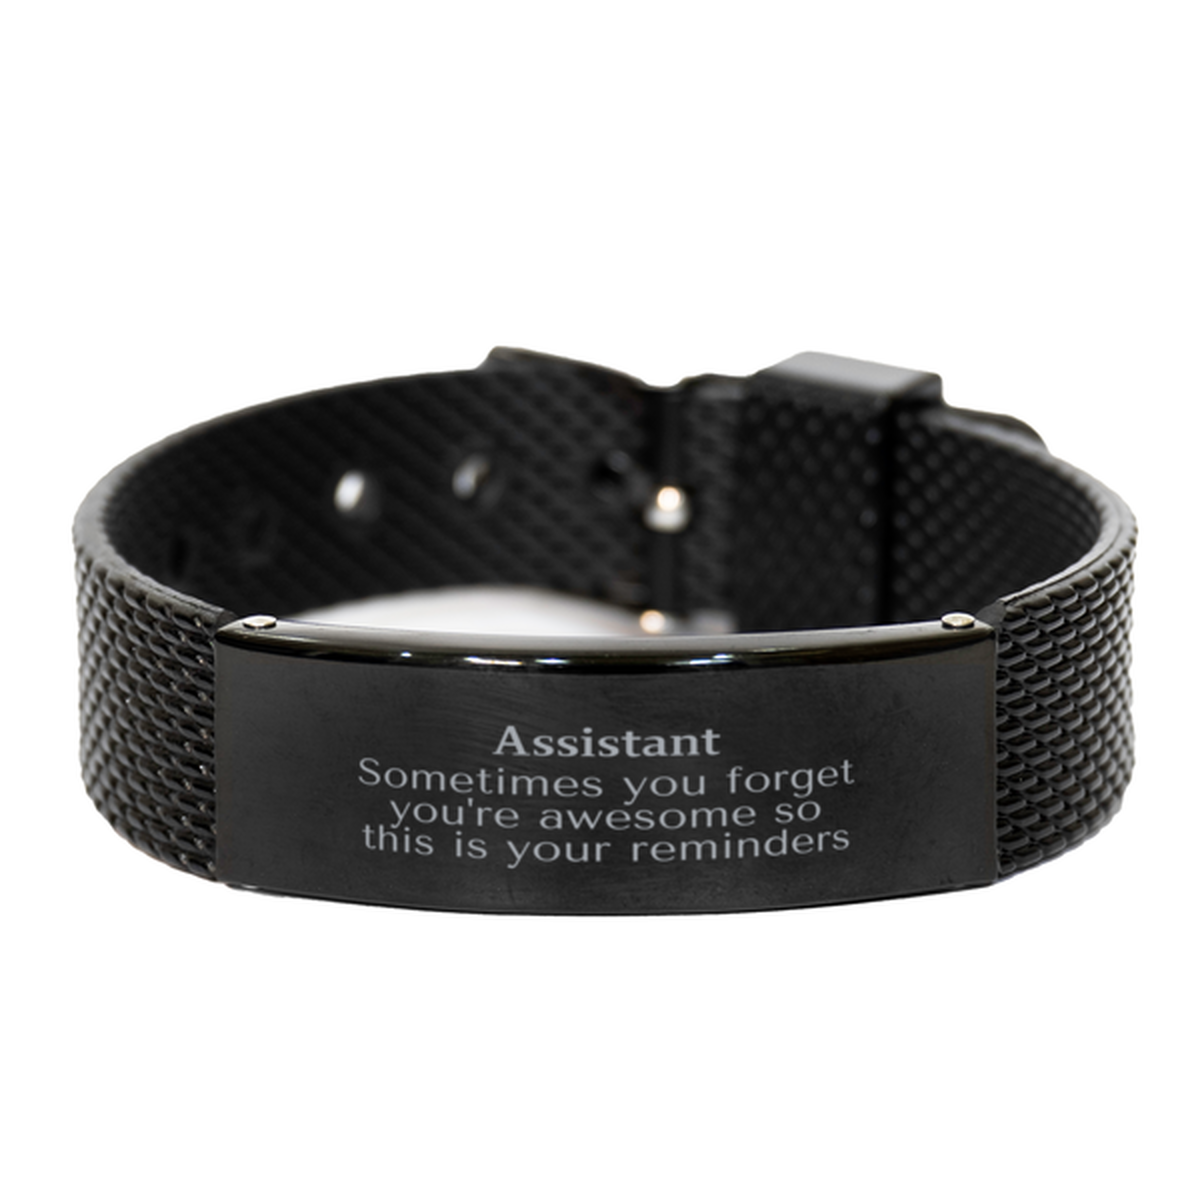 Sentimental Assistant Black Shark Mesh Bracelet, Assistant Sometimes you forget you're awesome so this is your reminders, Graduation Christmas Birthday Gifts for Assistant, Men, Women, Coworkers